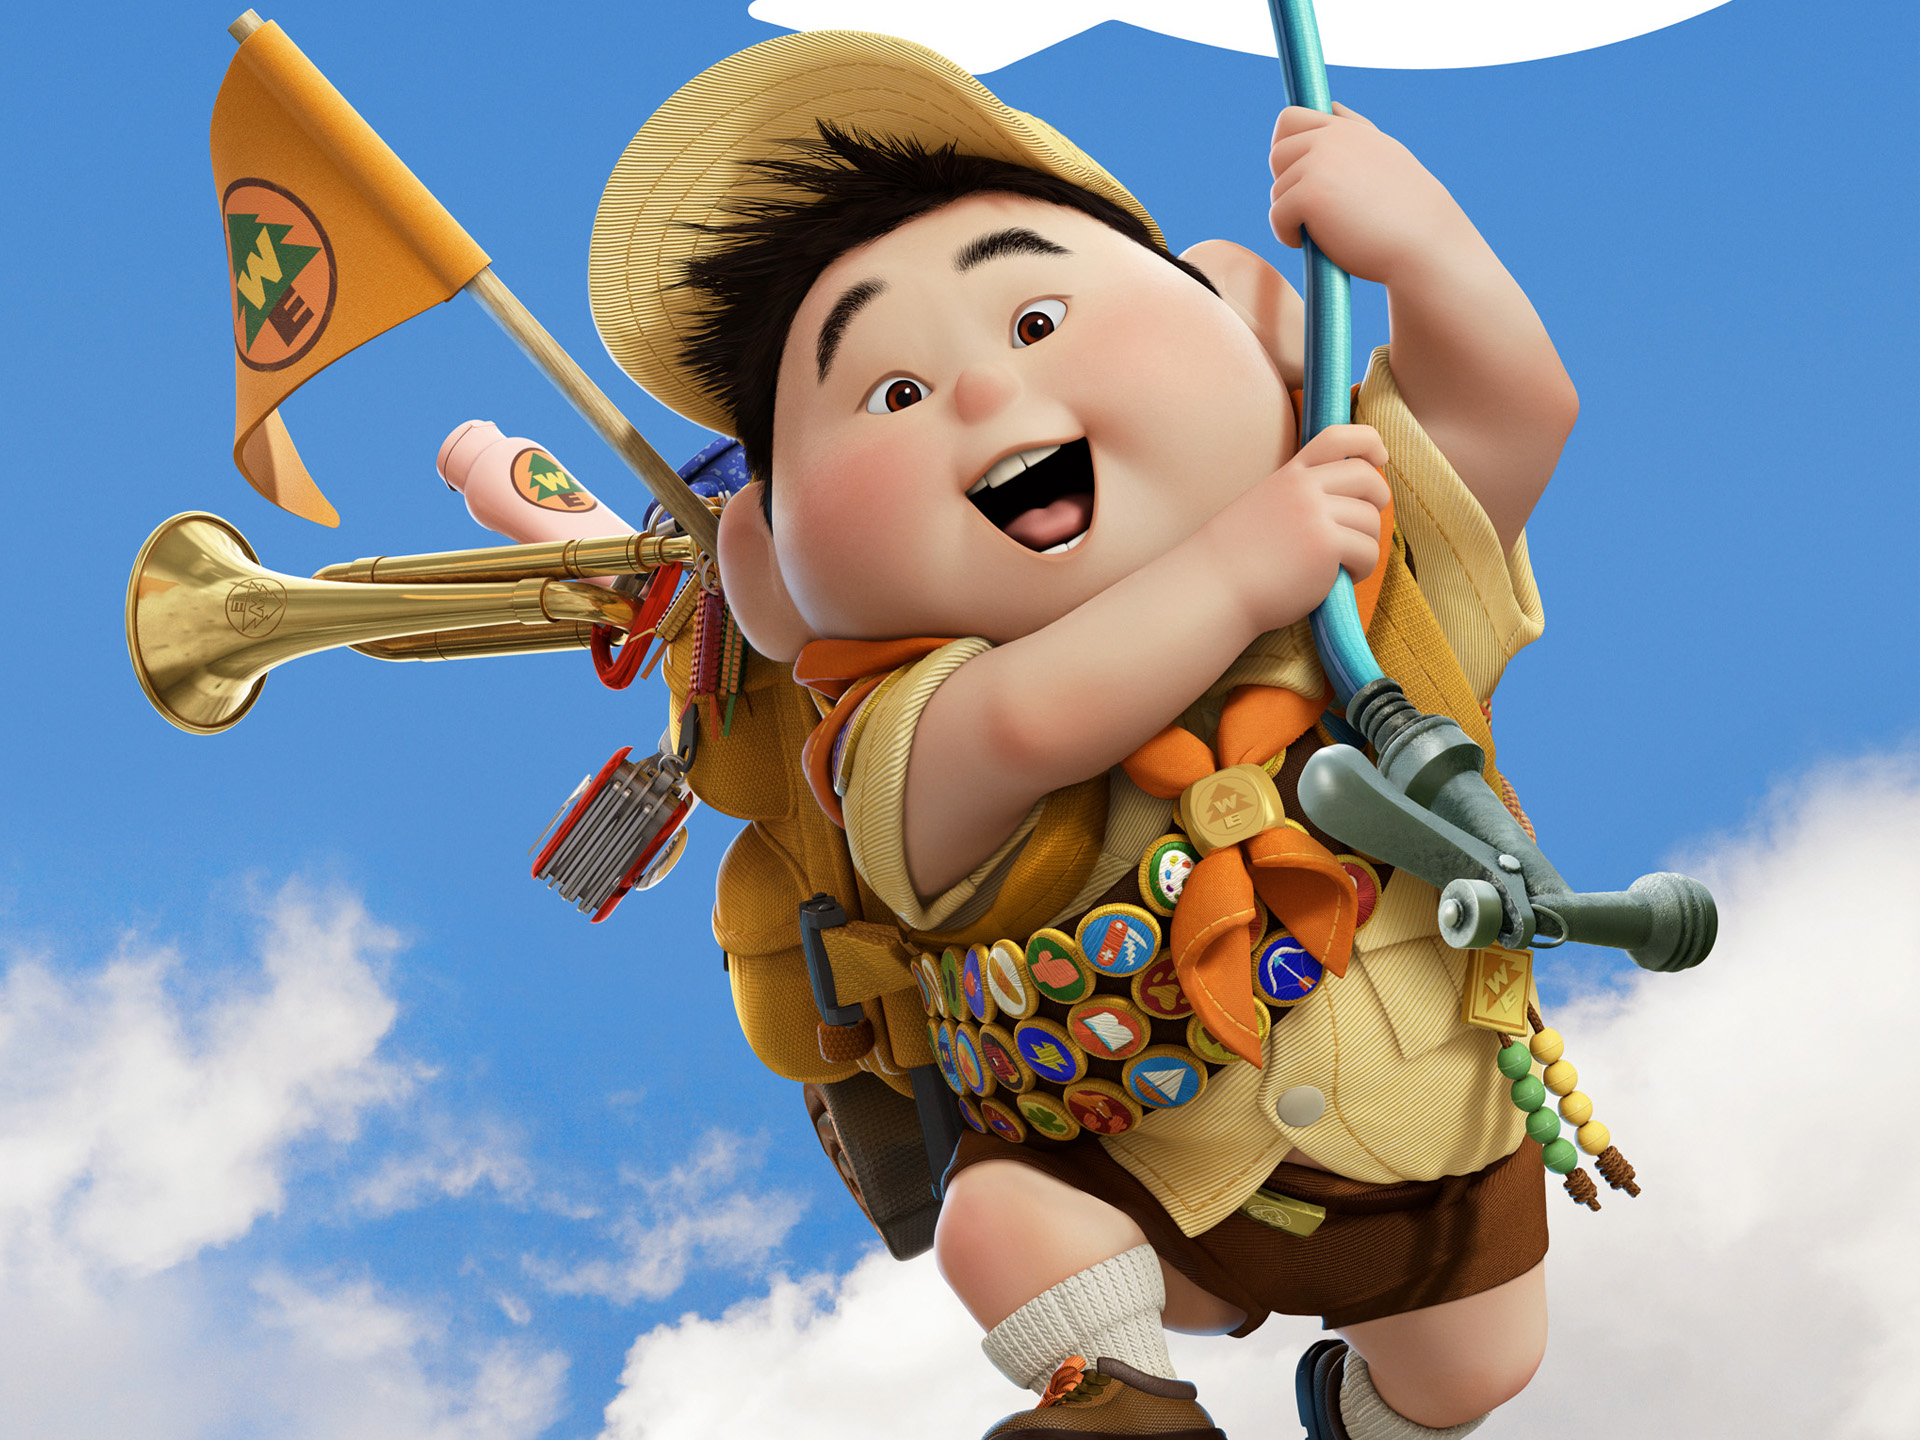 Russell Boy in Pixars UP Wallpapers HD Wallpapers